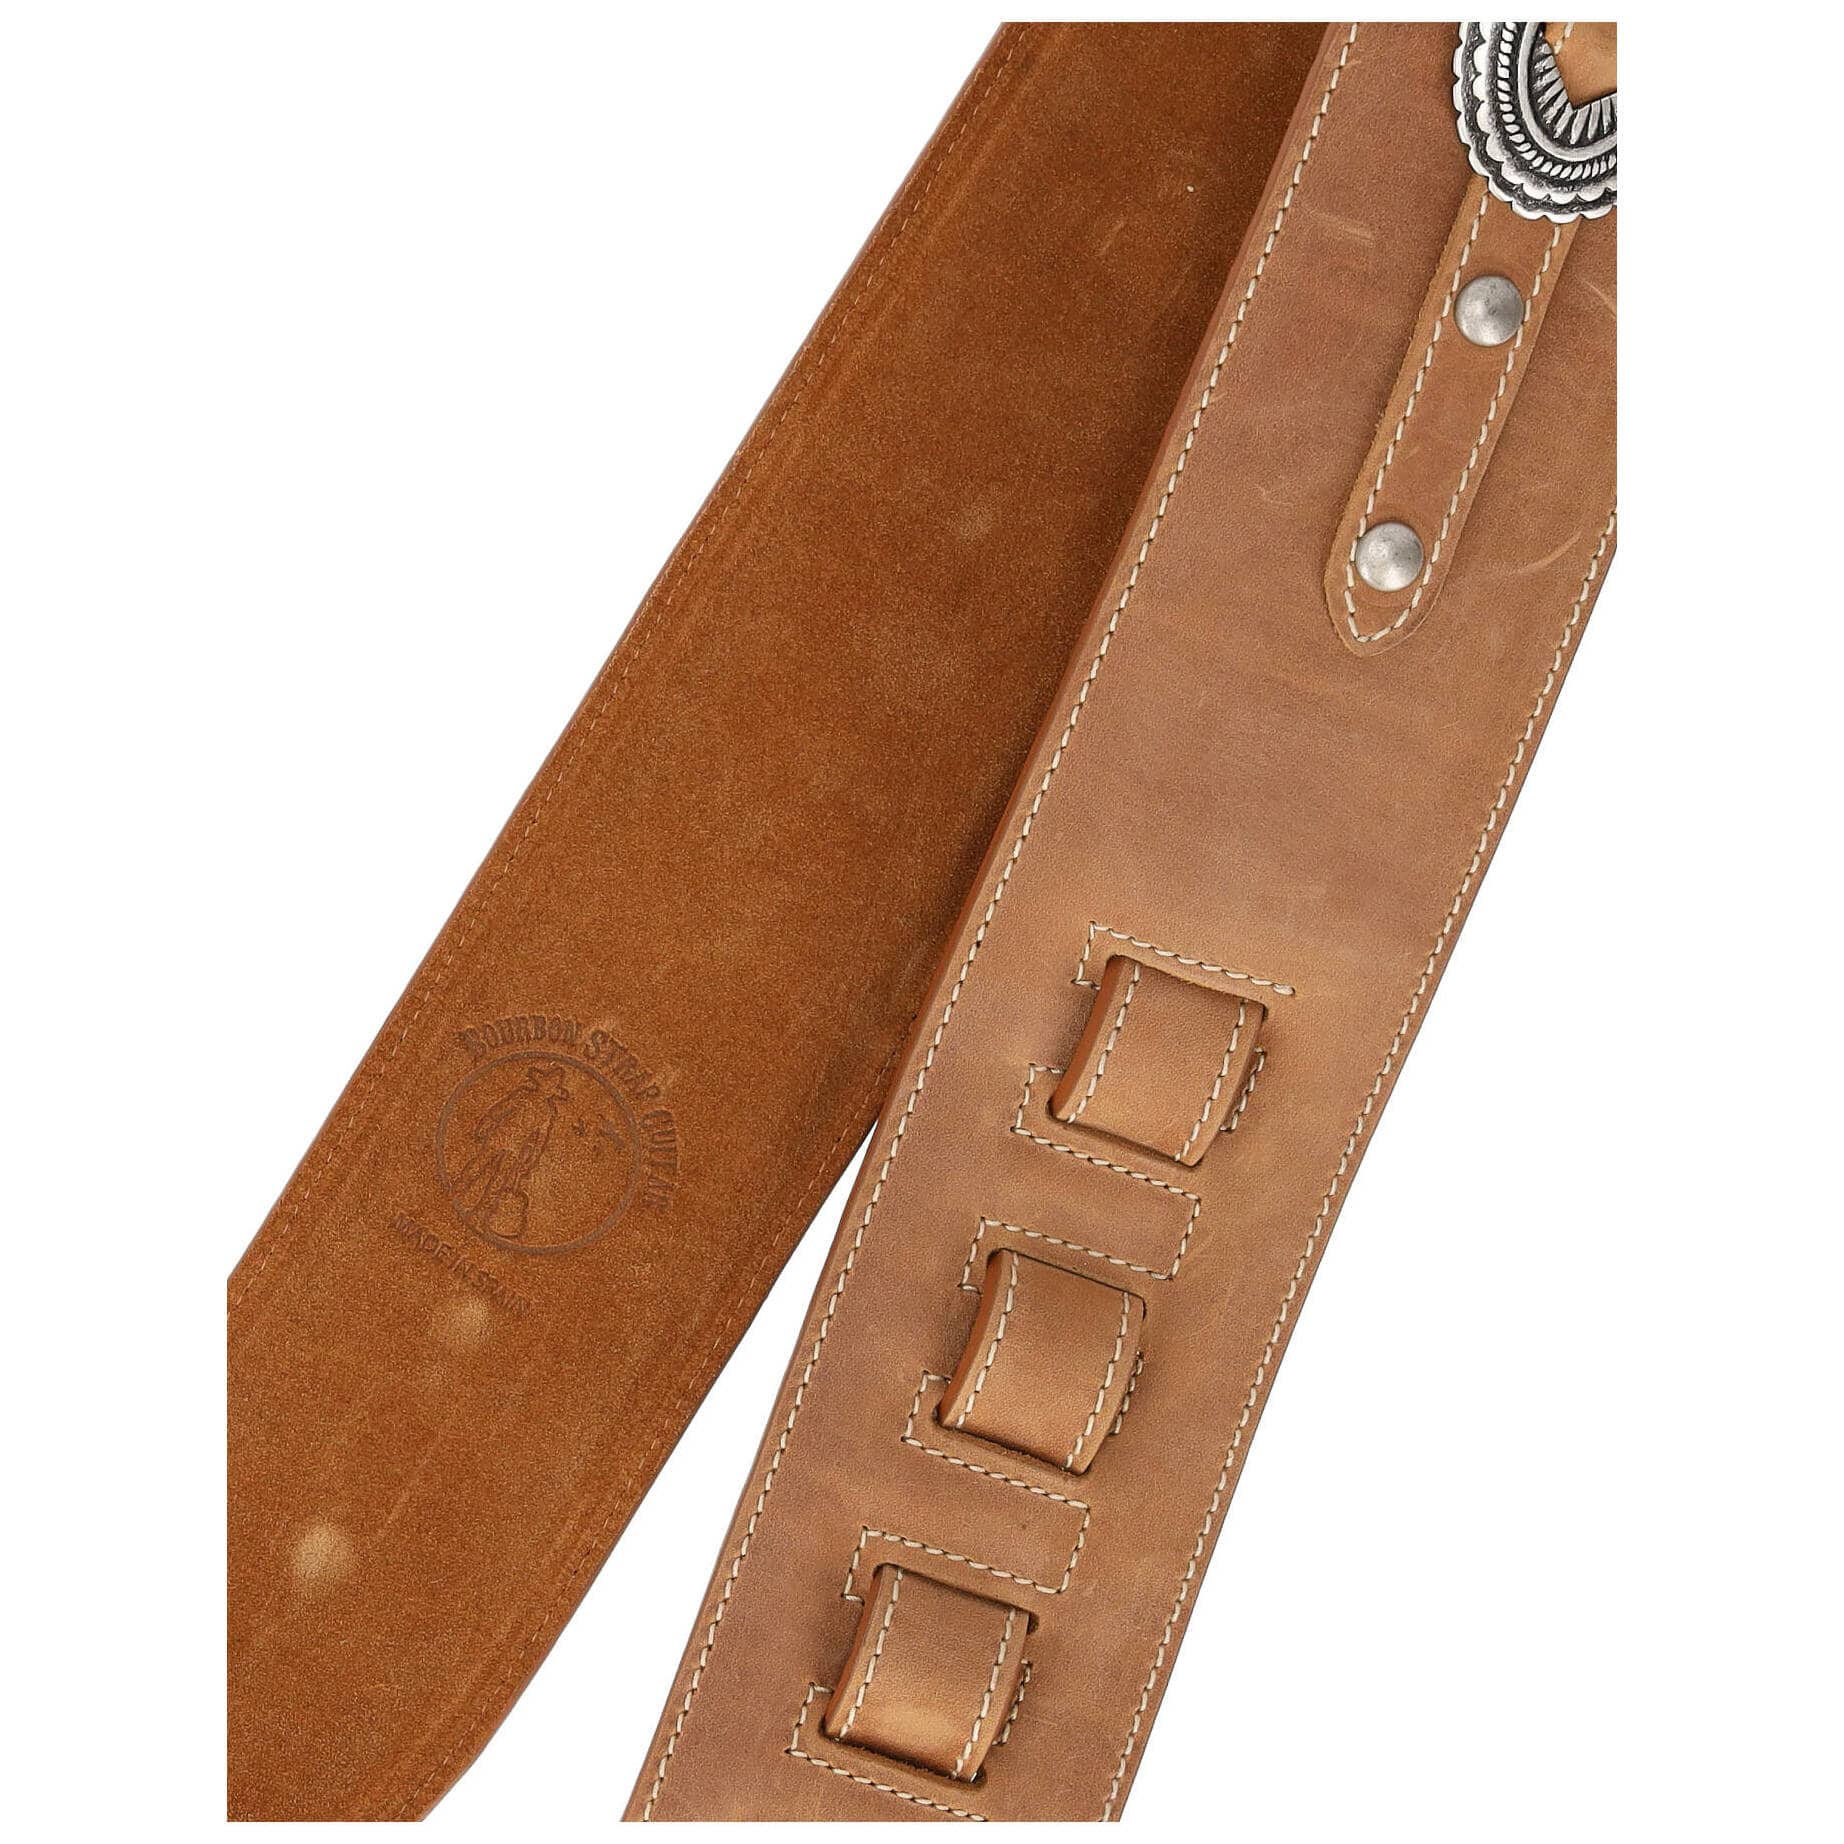 Bourbon Strap Guitar Texas Greased Leather 4